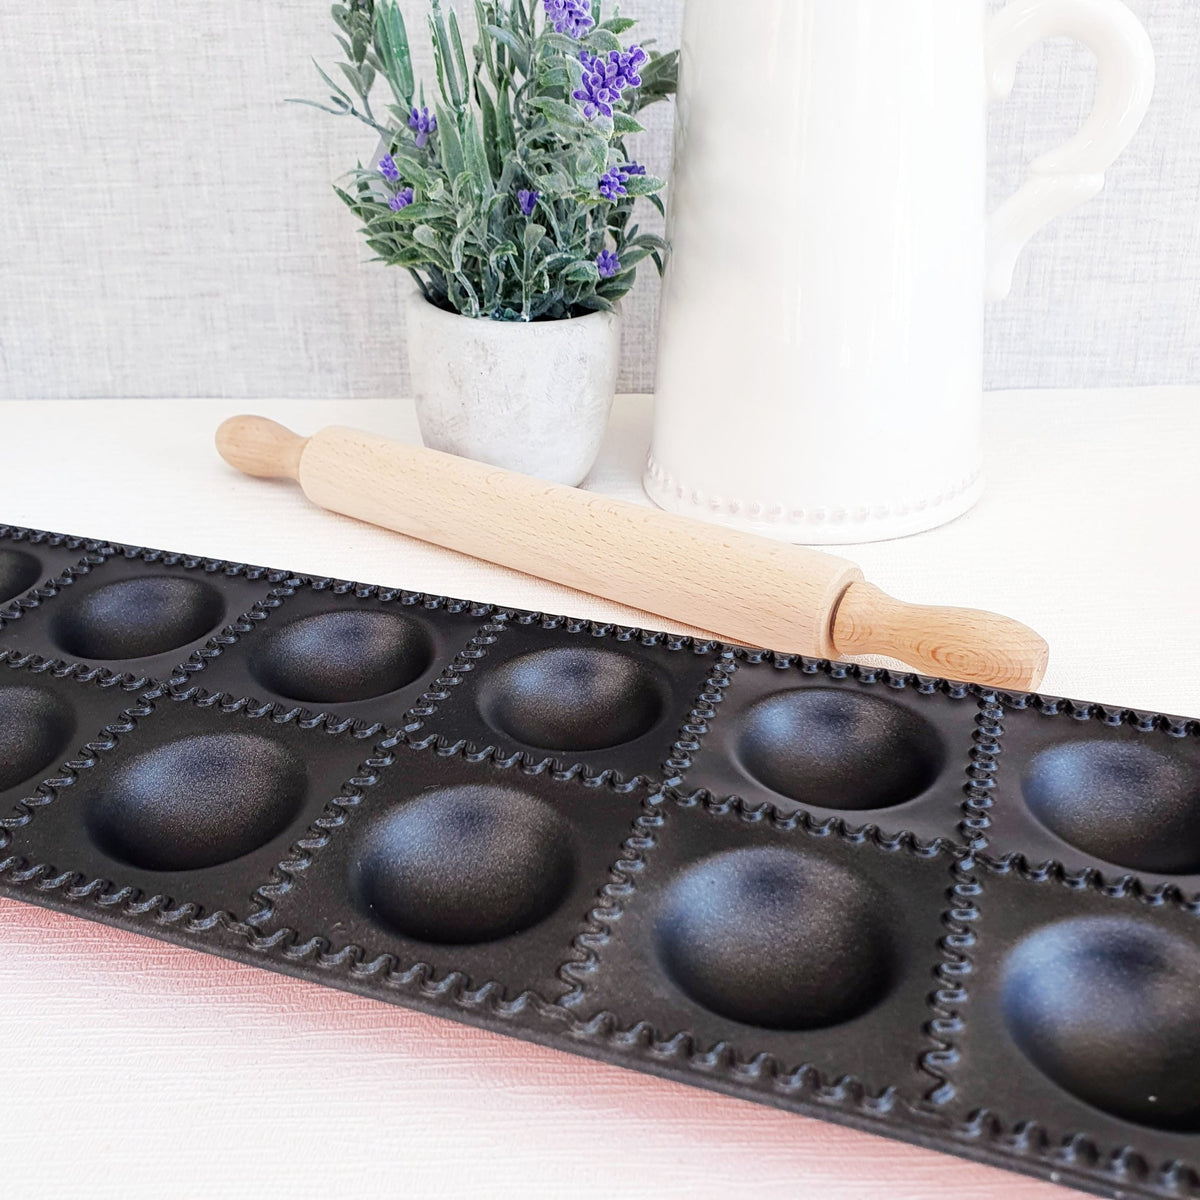 Ravioli Cutting Tray with 12 ravioli square sections and rolling pin and lavendar plant